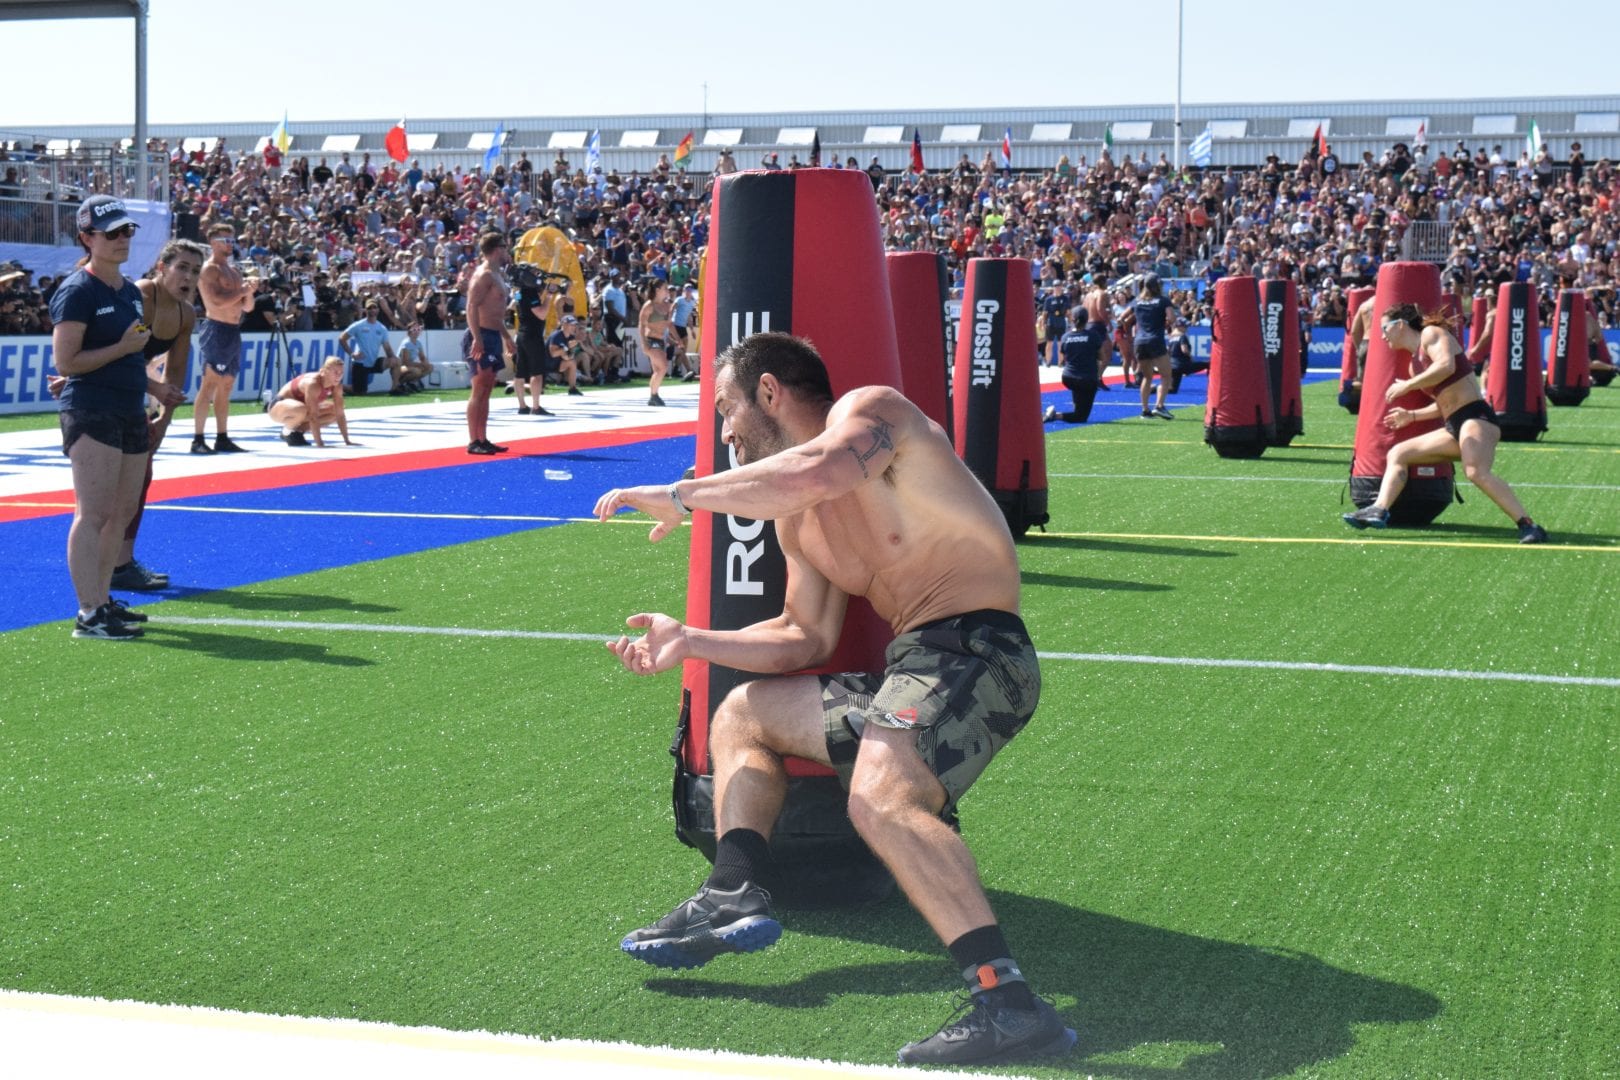 Rich Froning competes in the team sprint event at the 2019 CrossFit Games.